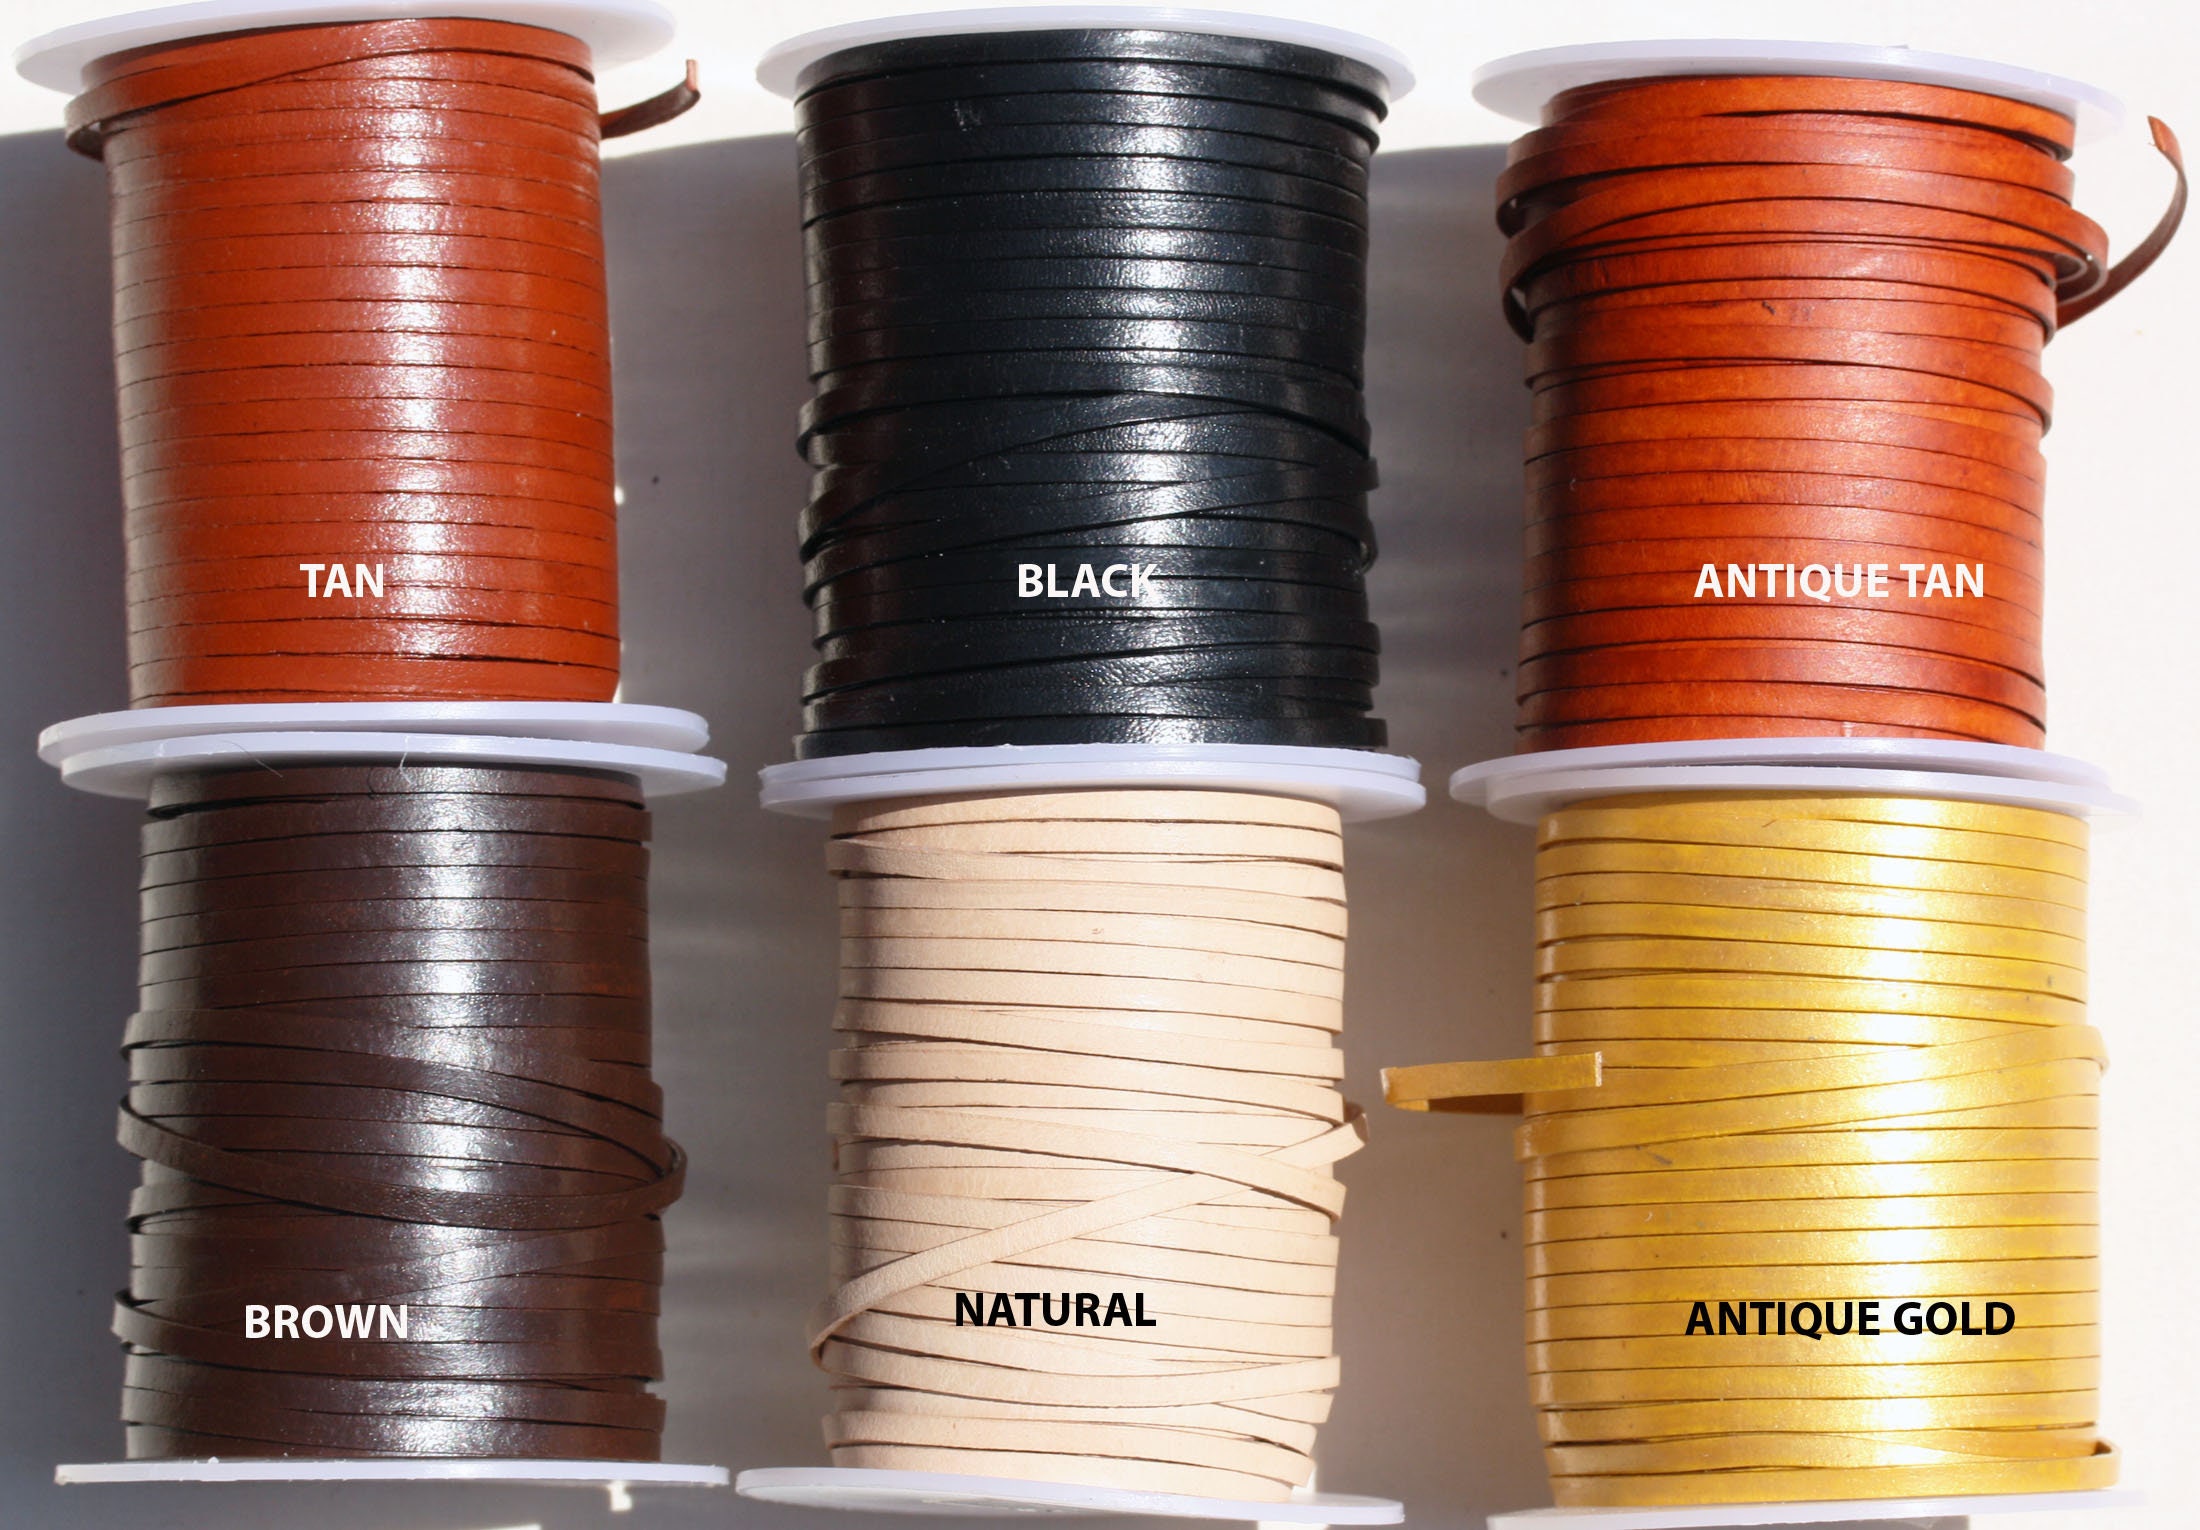 Faux Suede Cord: 3mm Flat Microsuede String, Red Orange Yellow Green Blue  Purple Pink Brown Grey Black White, Light Dark, Ships From USA 